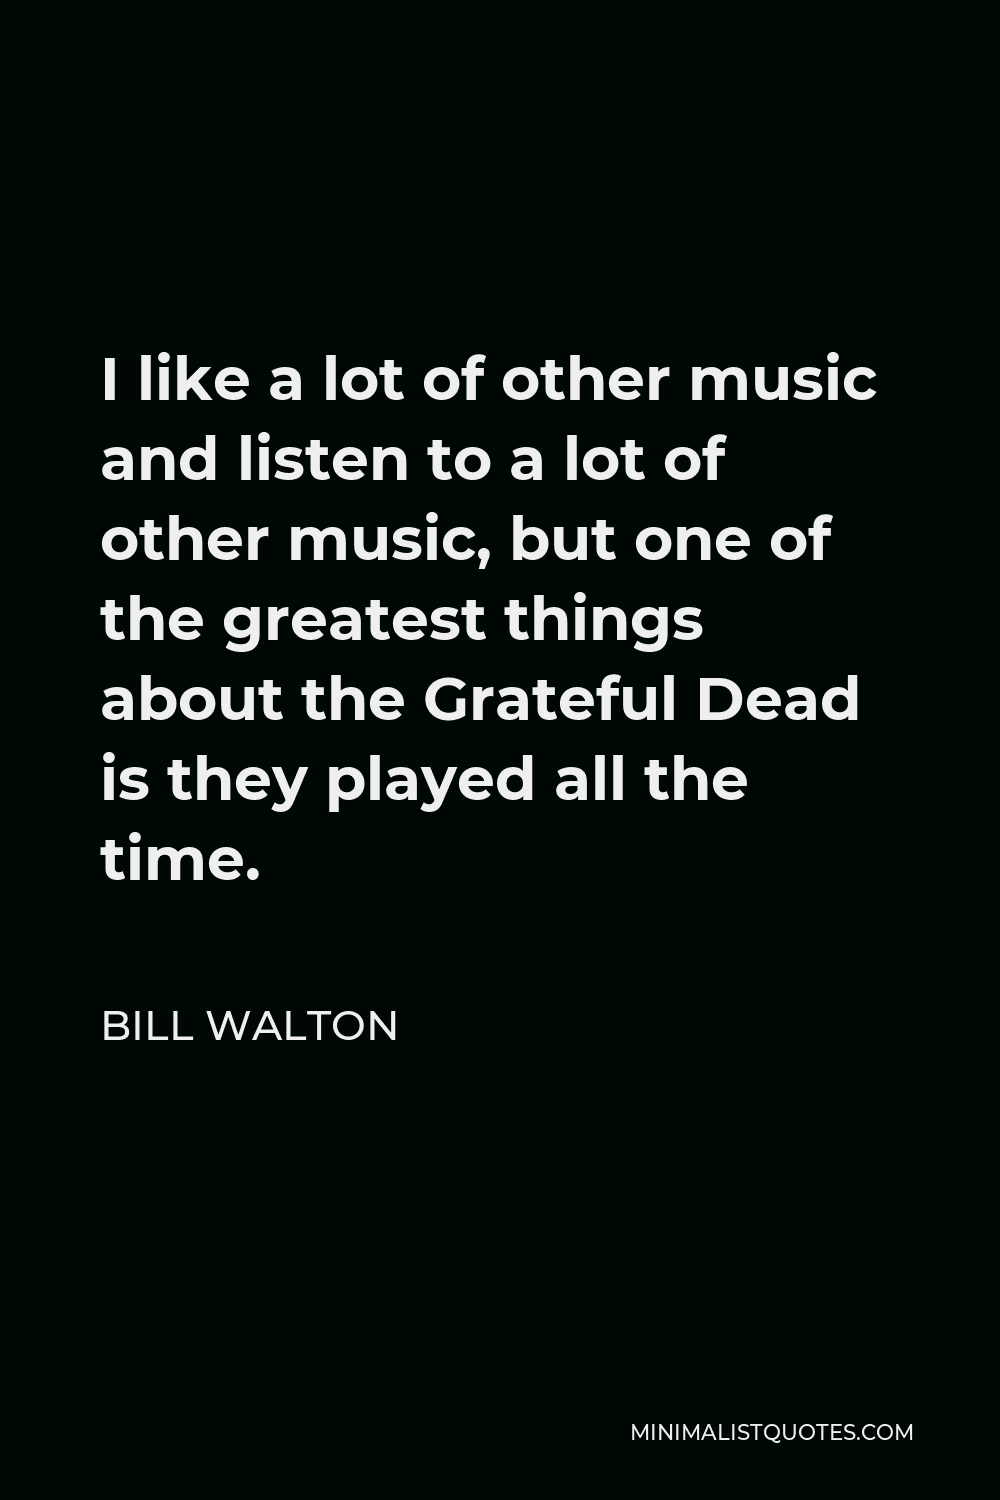 Bill Walton Quote - I like a lot of other music and listen to a lot of other music, but one of the greatest things about the Grateful Dead is they played all the time.